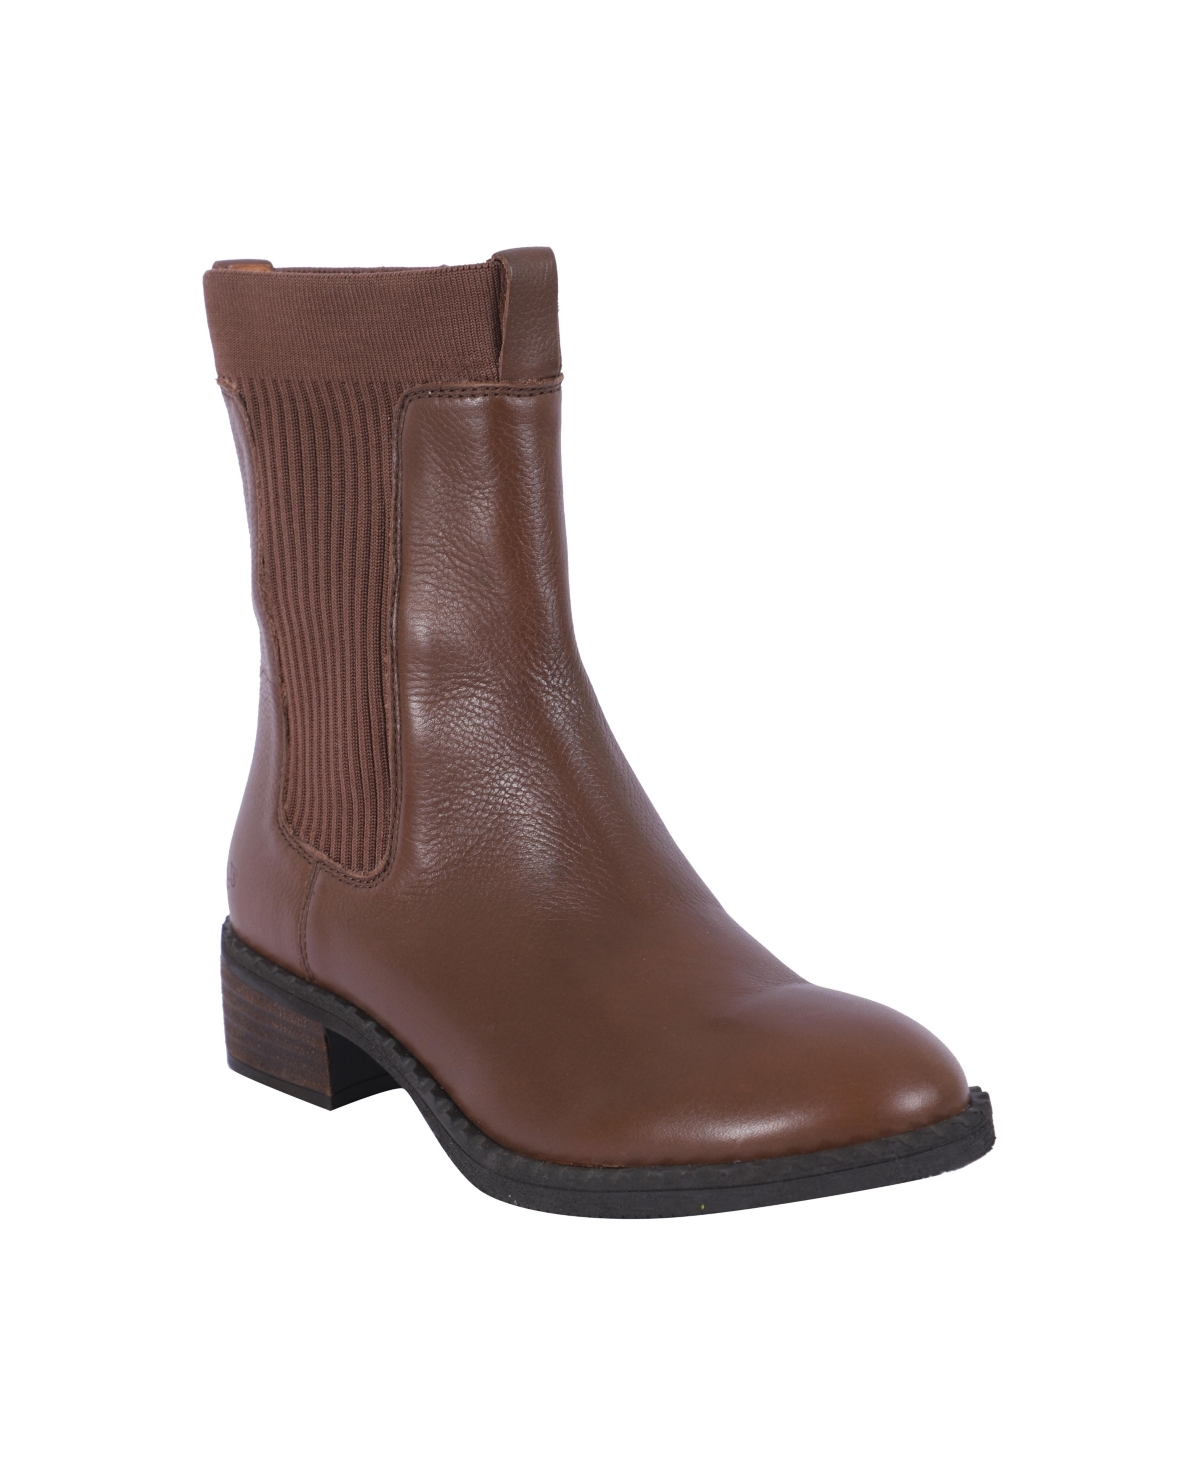 Women's Bernadette Pull-On Booties - Chocolate Leather